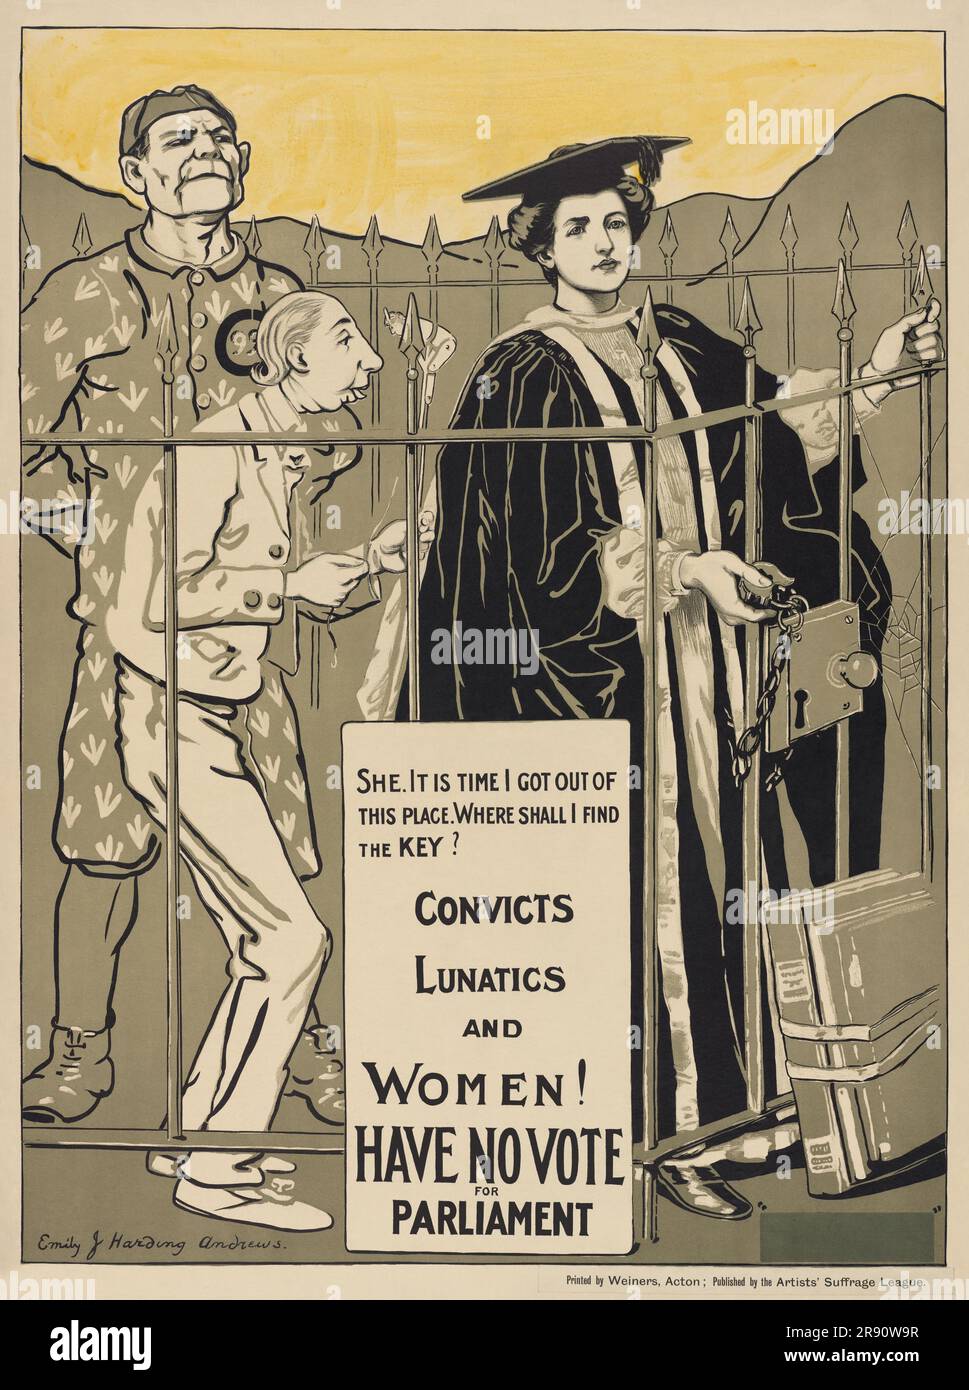 A vintage campaign poster for women's suffrage with the text Convicts Lunatics and Women! Have No Vote for Parliament, ca. 1907-1918. Stock Photo